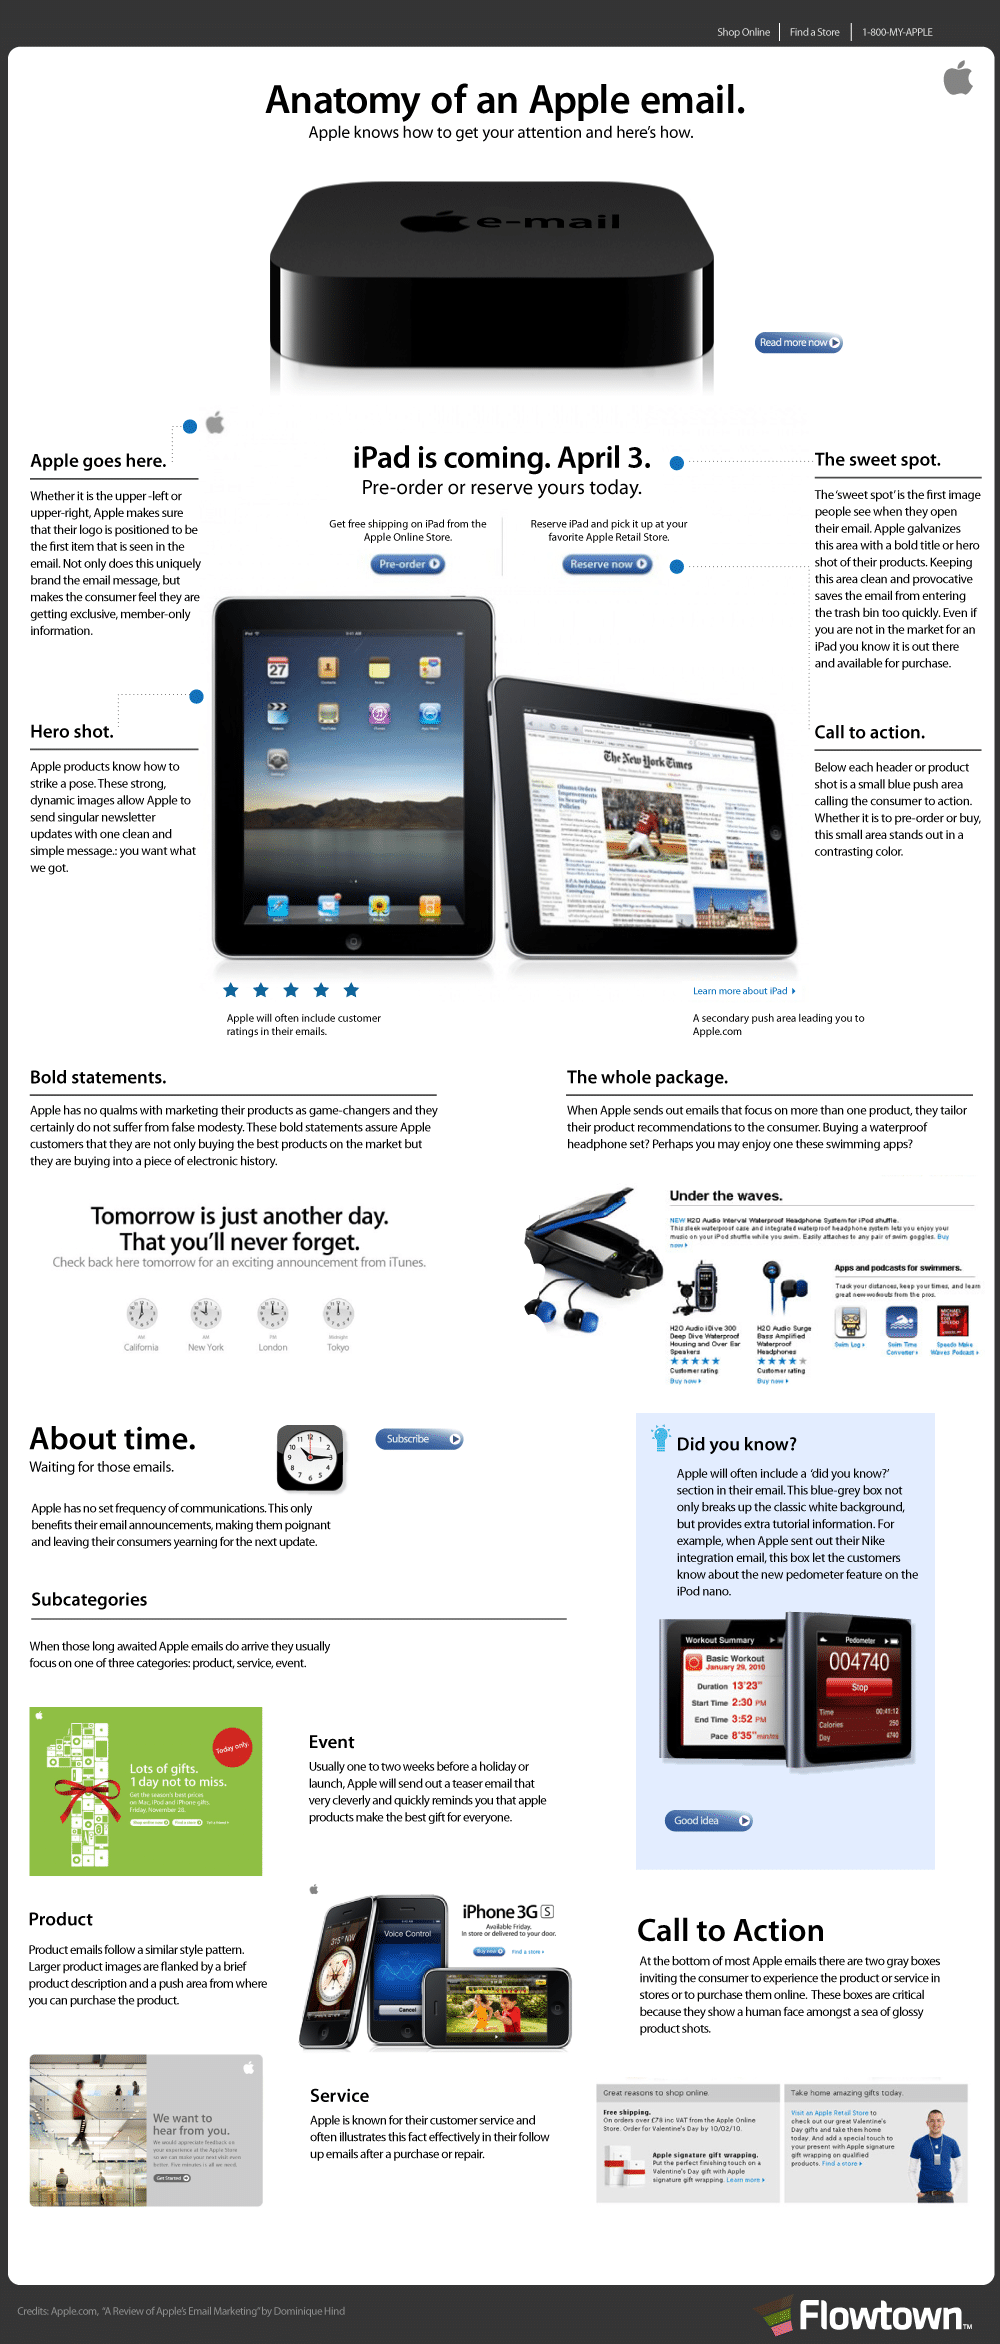 Formatting On An Apple Email